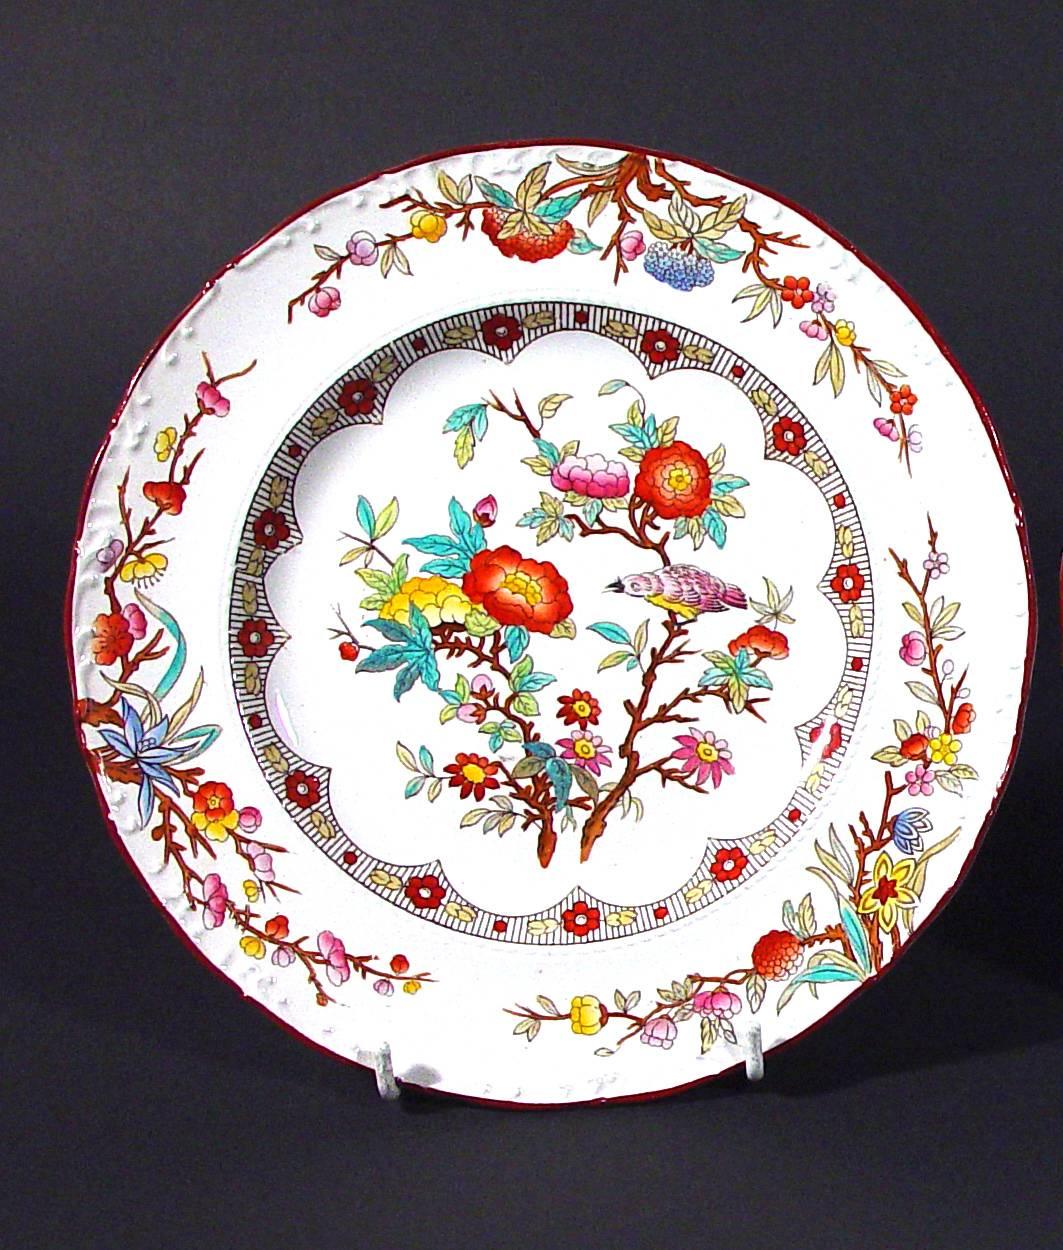 Wedgwood pottery pearlware set of six plates,
circa 1870.

The Wedgwood plates are brightly printed with a central scene of two flowering branches with a bird sitting on one. The rim has three similarly bright flowering branches.

